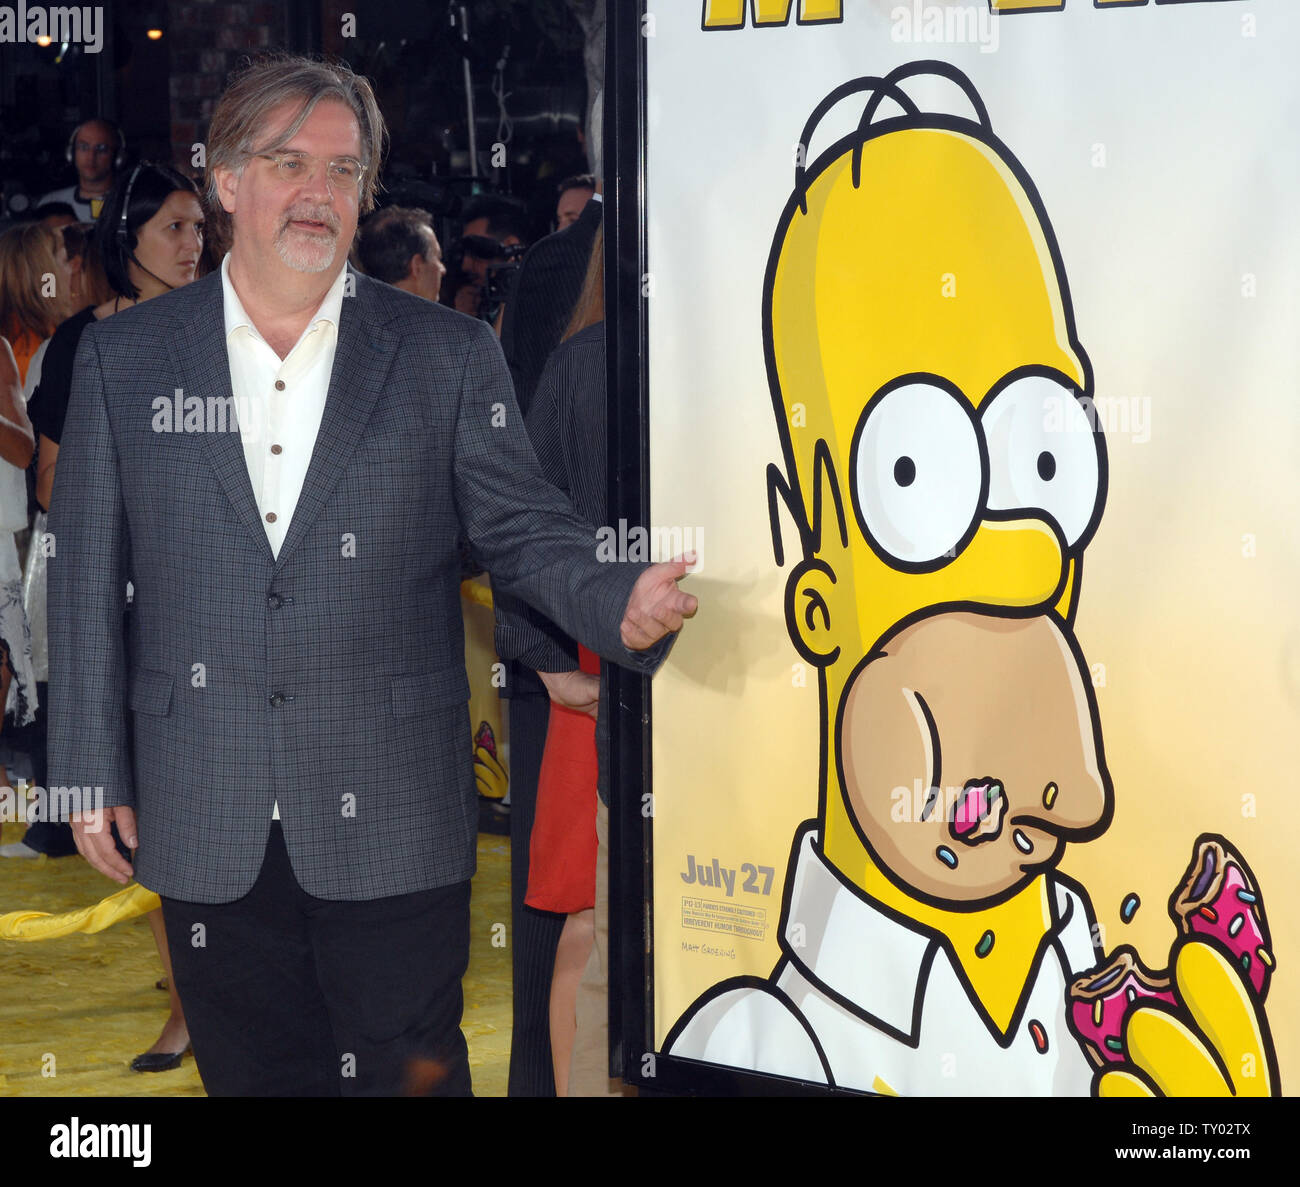 Matt Groening, the creator of the television series 'The Simpsons' arrives at the premiere of the animated motion picture comedy 'The Simpsons Movie' in the Westwood section of Los Angeles on July 24, 2007. (UPI Photo/Jim Ruymen) Stock Photo